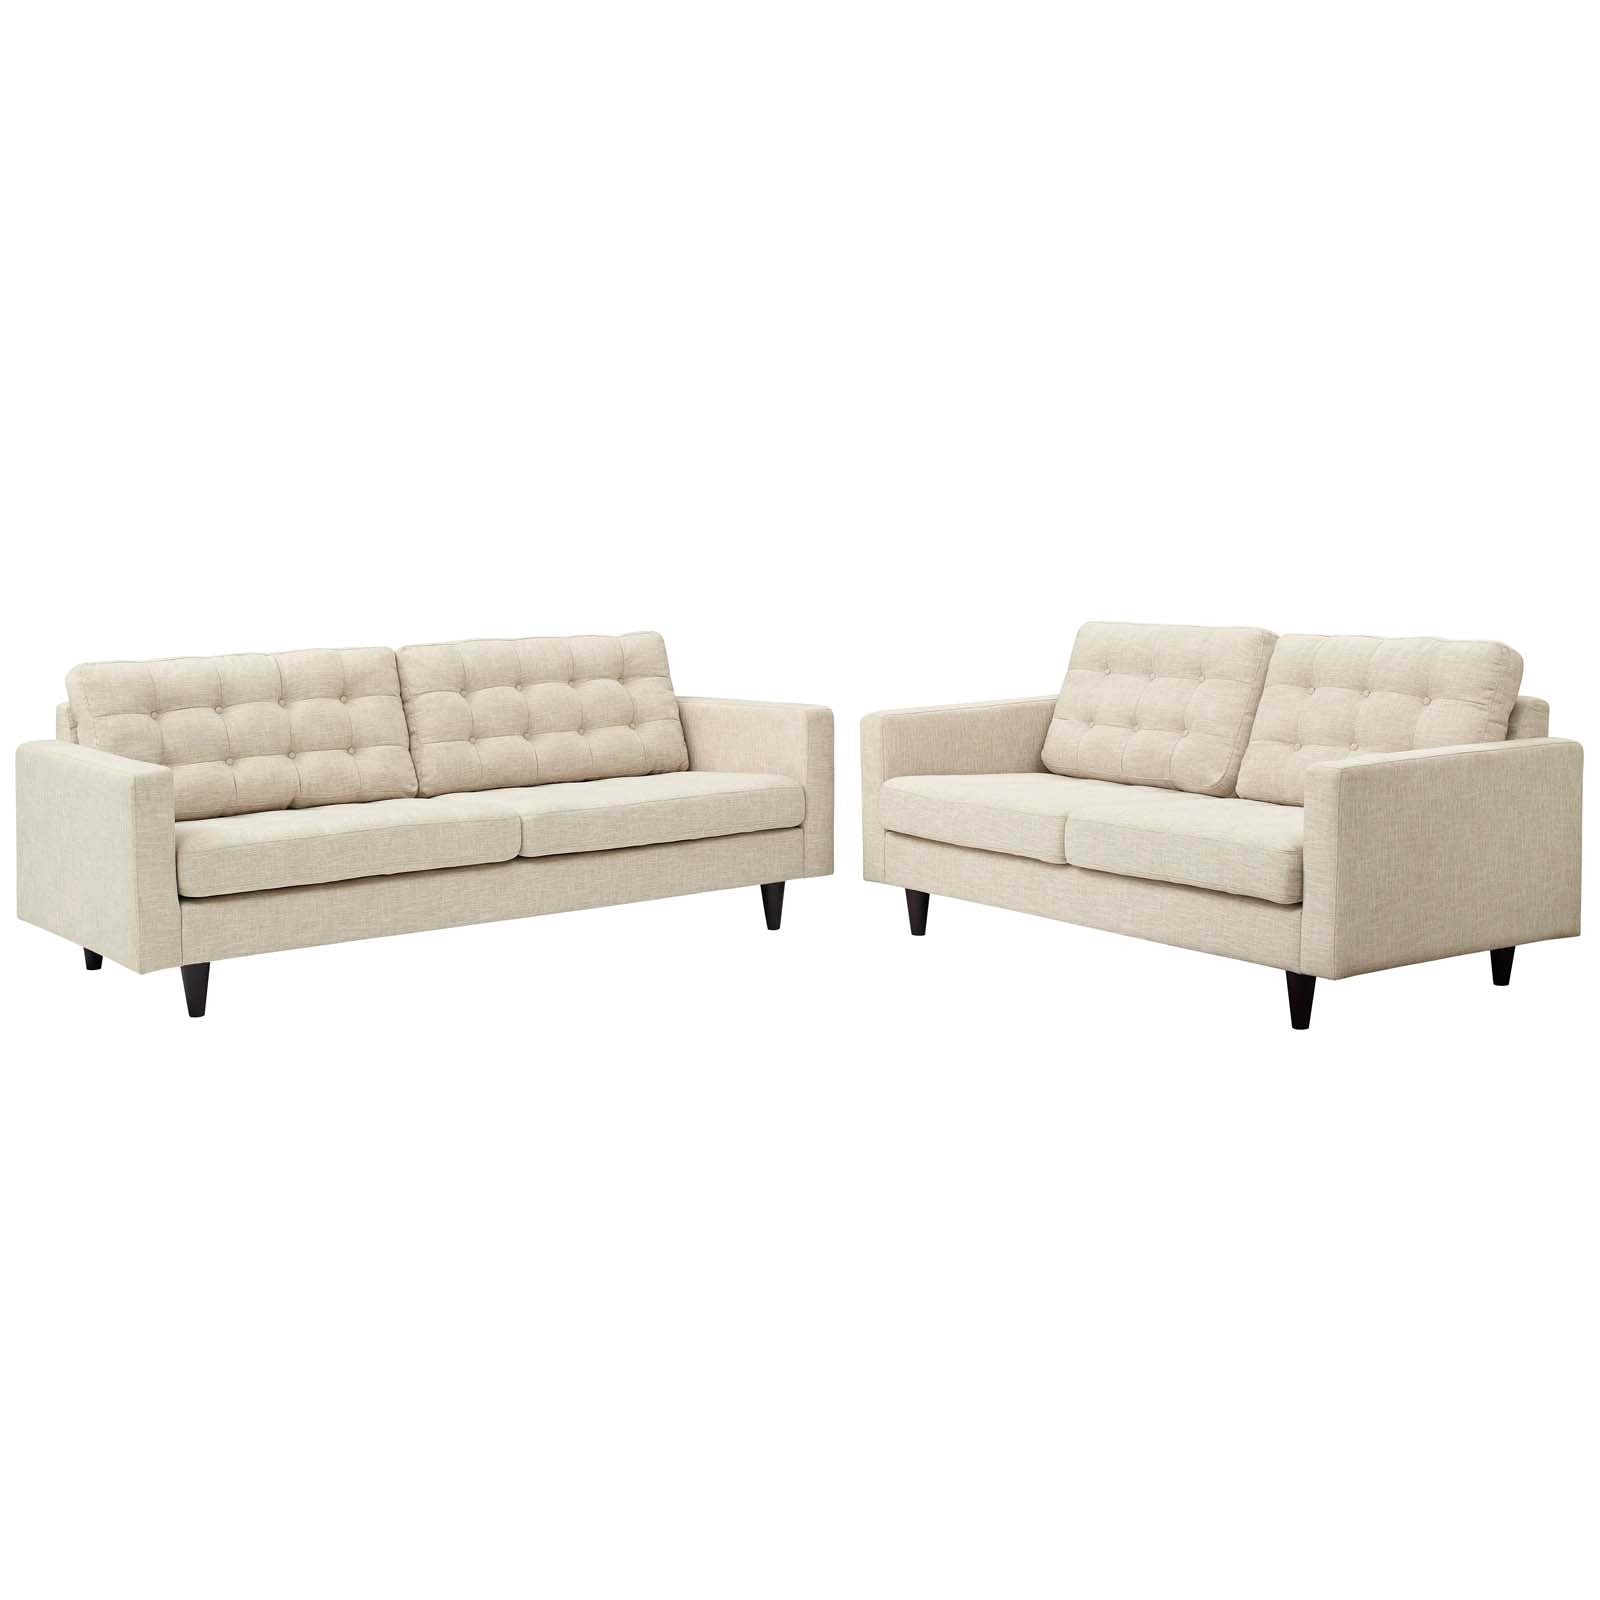 Empress Sofa and Loveseat Set of 2 - East Shore Modern Home Furnishings